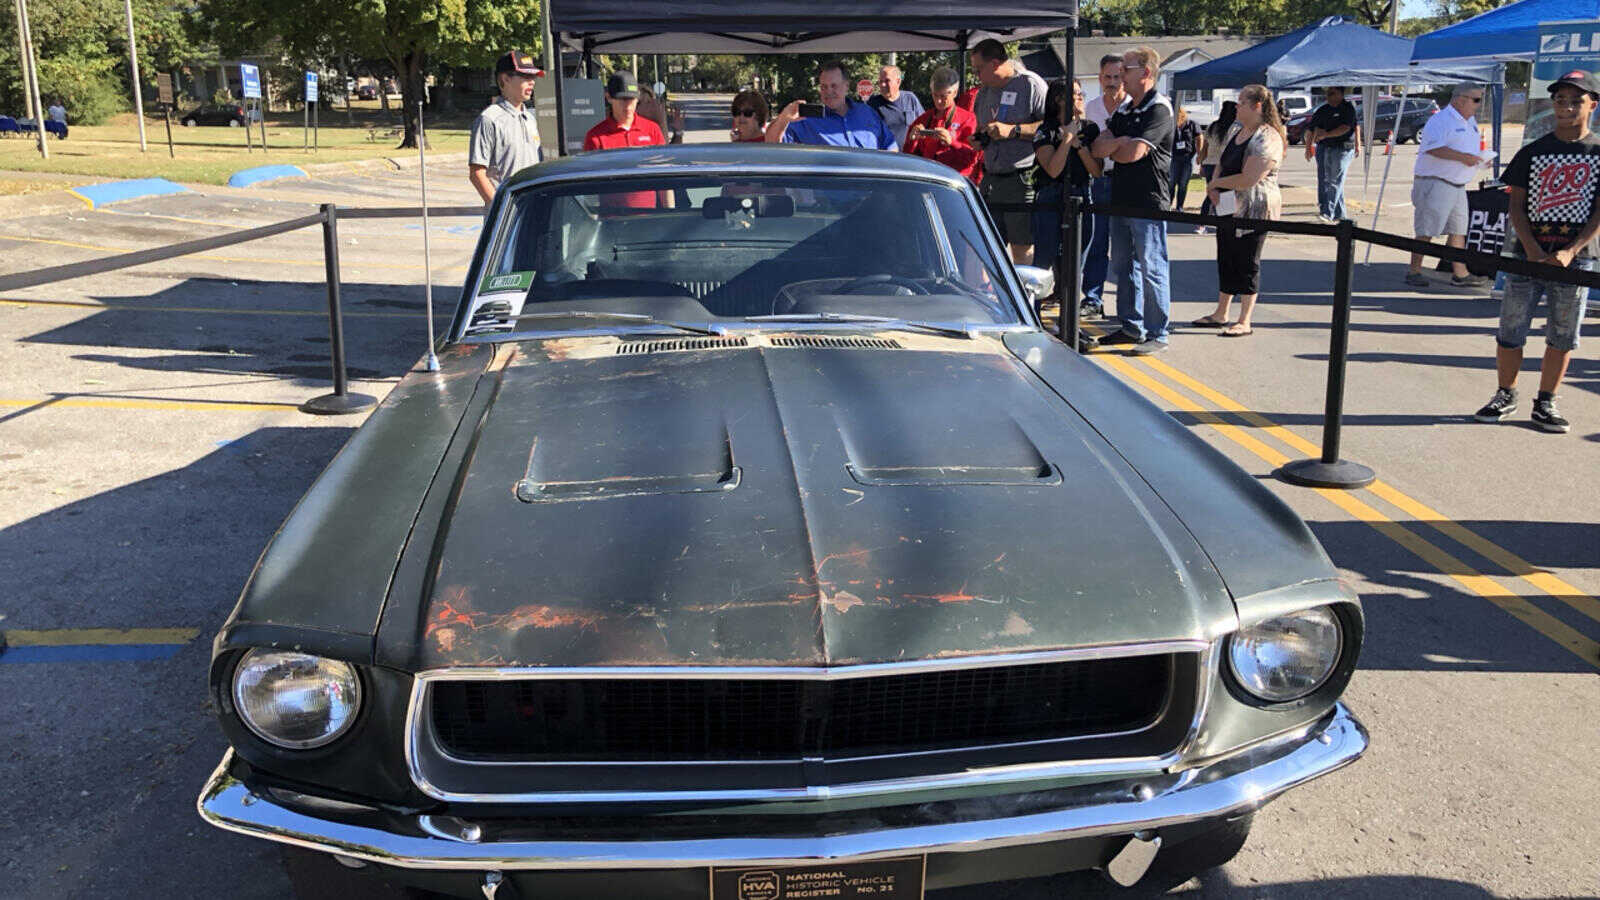 This is the actual 1968 Mustang Driven by Steve McQueen in the movie Bullitt